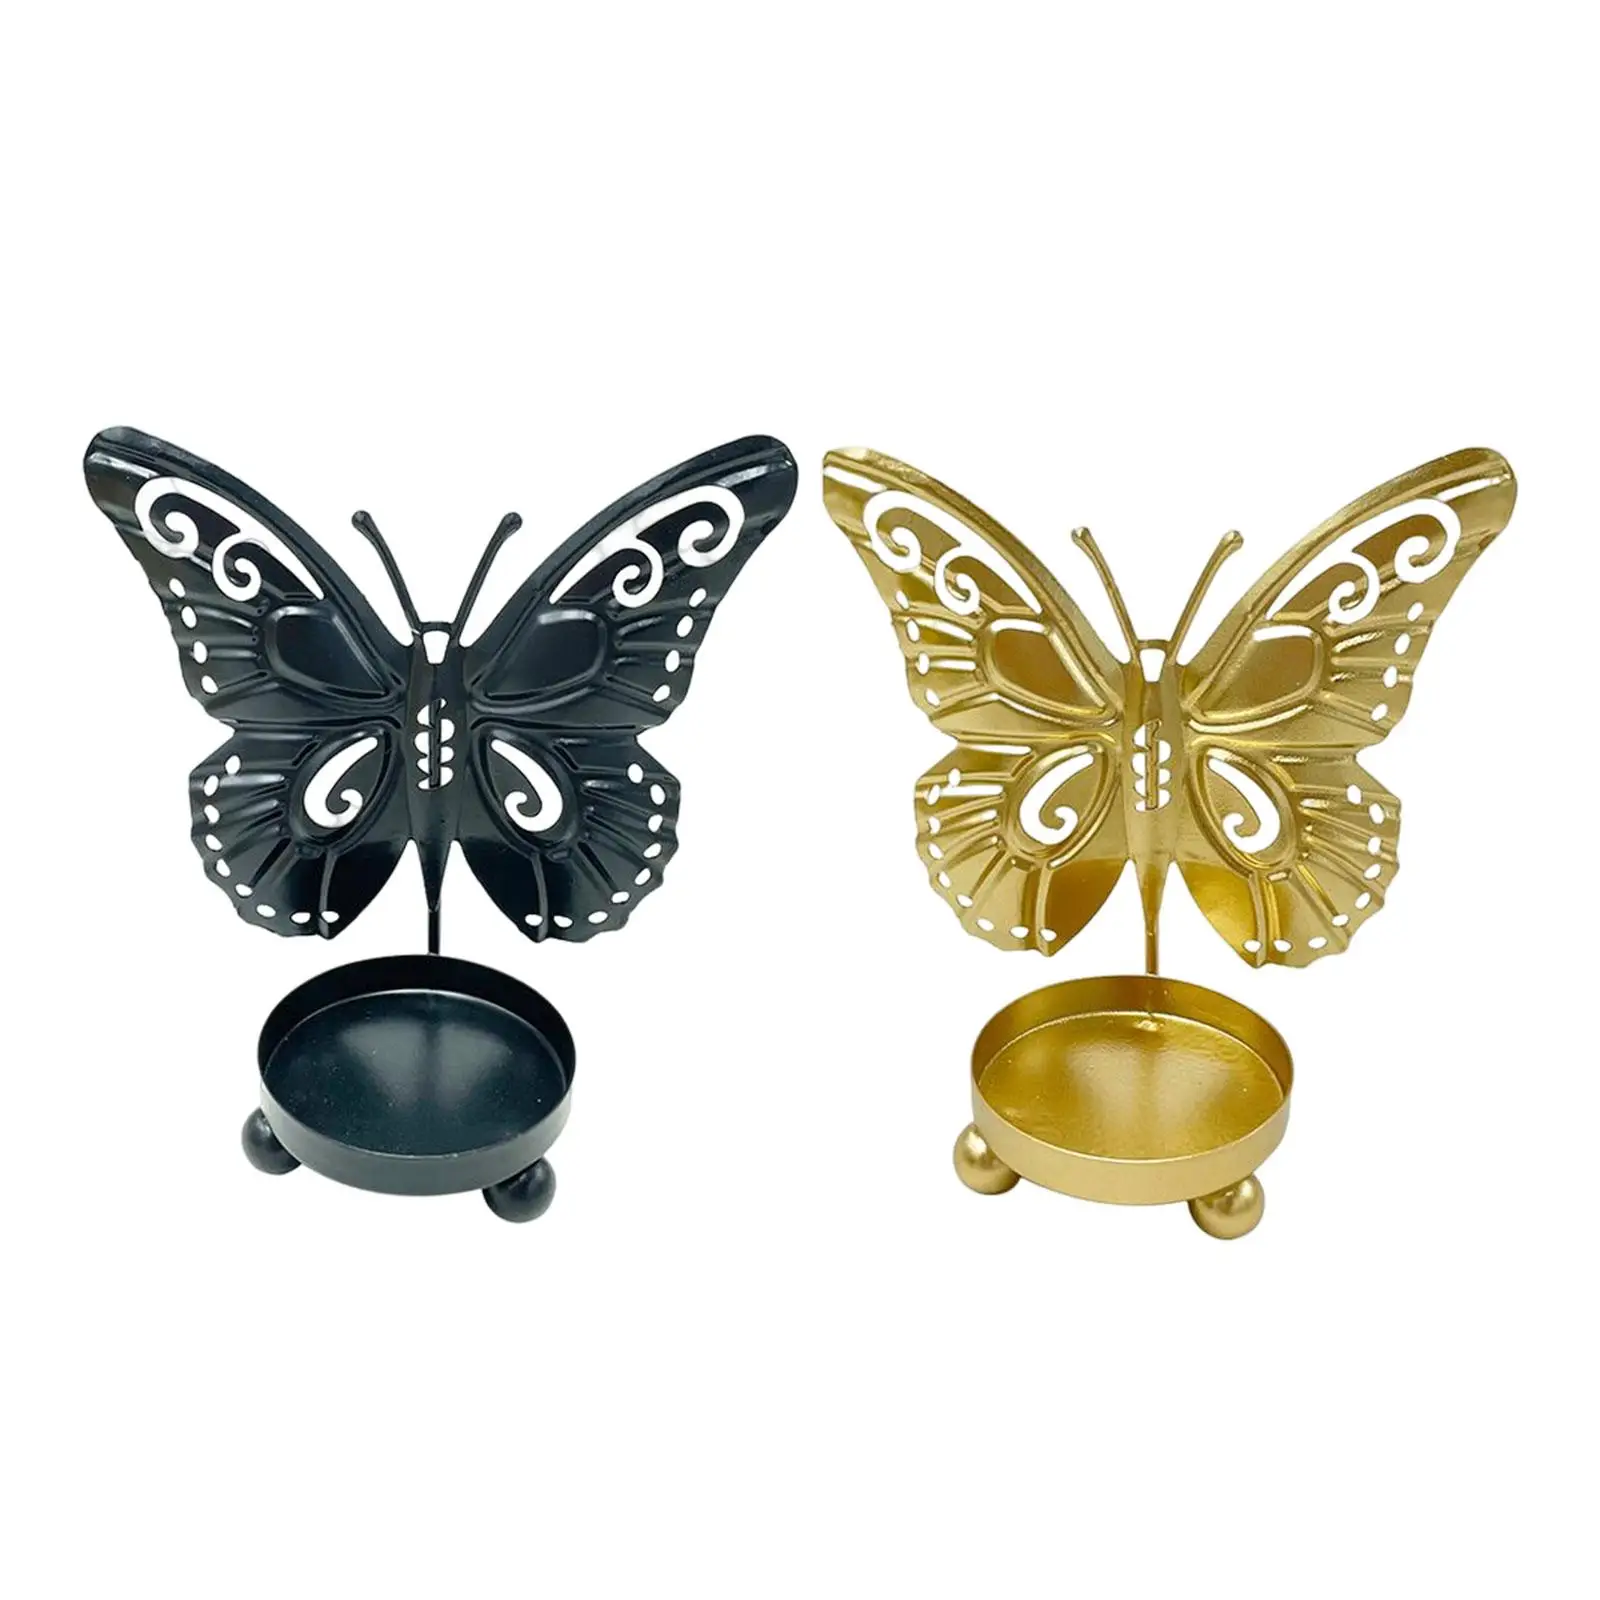 Creative Butterfly Candle Holder Hollow Carved Tealight Candle Holders Ornament